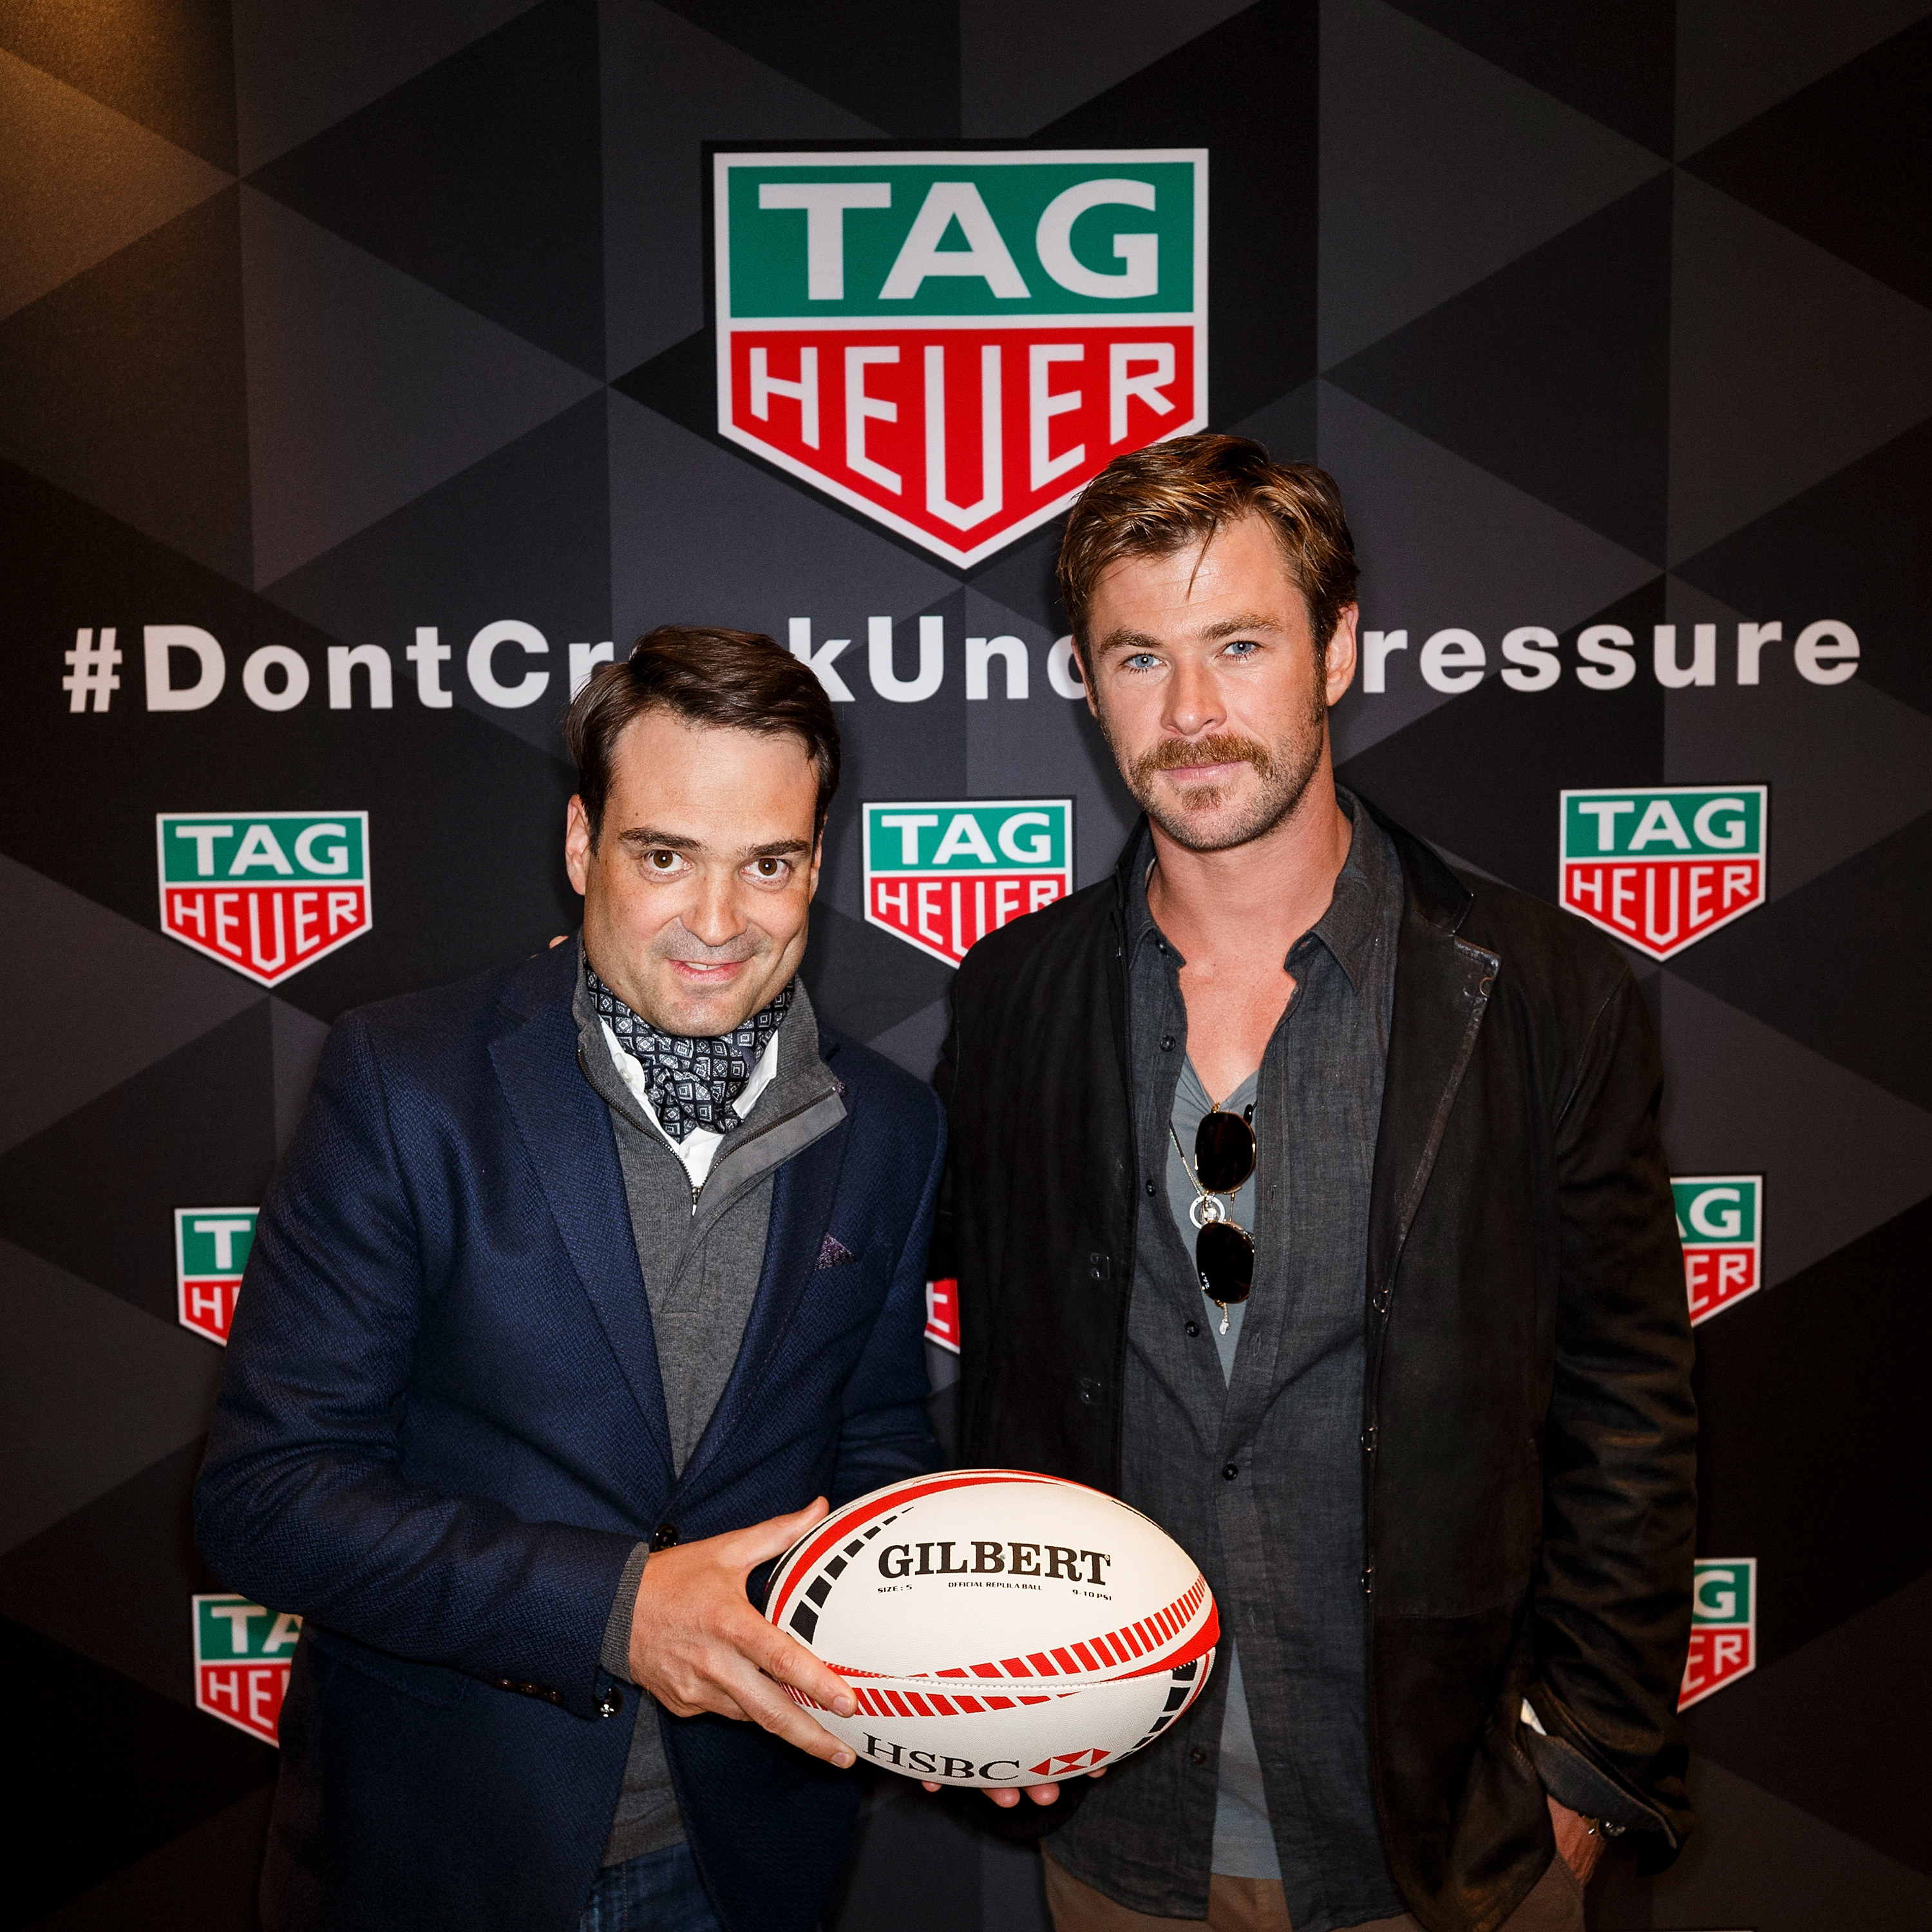 TAG Heuer President North America Kilian Muller (L) and TAG Heuer Ambassador Chris Hemsworth pose after TAG Heuer donates money to indigenous youth rugby programs